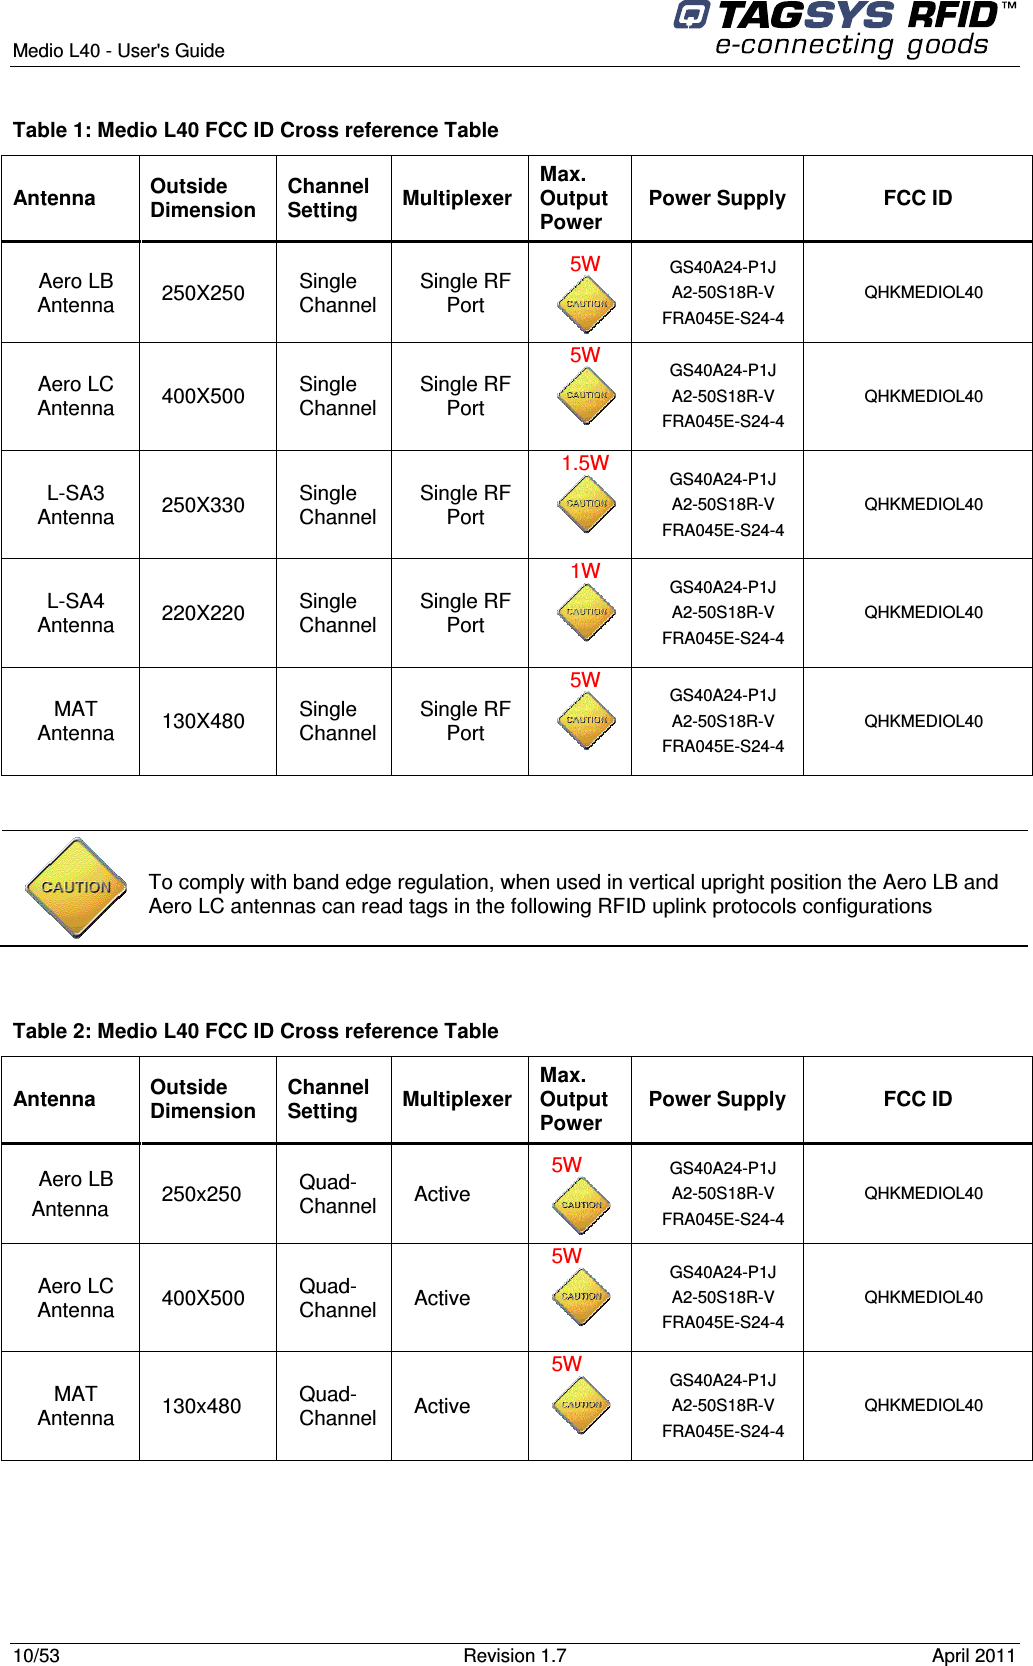  Medio L40 - User&apos;s Guide     10/53  Revision 1.7  April 2011   Table 1: Medio L40 FCC ID Cross reference Table Antenna  Outside Dimension Channel Setting  Multiplexer Max. Output Power Power Supply  FCC ID Aero LB Antenna  250X250  Single Channel  Single RF Port 5W  GS40A24-P1J A2-50S18R-V FRA045E-S24-4 QHKMEDIOL40 Aero LC Antenna  400X500  Single Channel  Single RF Port 5W  GS40A24-P1J A2-50S18R-V FRA045E-S24-4 QHKMEDIOL40 L-SA3 Antenna  250X330  Single Channel  Single RF Port 1.5W  GS40A24-P1J A2-50S18R-V FRA045E-S24-4 QHKMEDIOL40 L-SA4 Antenna  220X220  Single Channel  Single RF Port 1W  GS40A24-P1J A2-50S18R-V FRA045E-S24-4 QHKMEDIOL40 MAT Antenna  130X480  Single Channel  Single RF Port 5W  GS40A24-P1J A2-50S18R-V FRA045E-S24-4 QHKMEDIOL40    Table 2: Medio L40 FCC ID Cross reference Table Antenna  Outside Dimension Channel Setting  Multiplexer Max. Output Power Power Supply  FCC ID Aero LB Antenna  250x250  Quad-Channel  Active 5W  GS40A24-P1J A2-50S18R-V FRA045E-S24-4 QHKMEDIOL40 Aero LC Antenna  400X500  Quad-Channel  Active 5W  GS40A24-P1J A2-50S18R-V FRA045E-S24-4 QHKMEDIOL40 MAT Antenna  130x480  Quad-Channel  Active 5W GS40A24-P1J A2-50S18R-V FRA045E-S24-4 QHKMEDIOL40   To comply with band edge regulation, when used in vertical upright position the Aero LB and Aero LC antennas can read tags in the following RFID uplink protocols configurations 